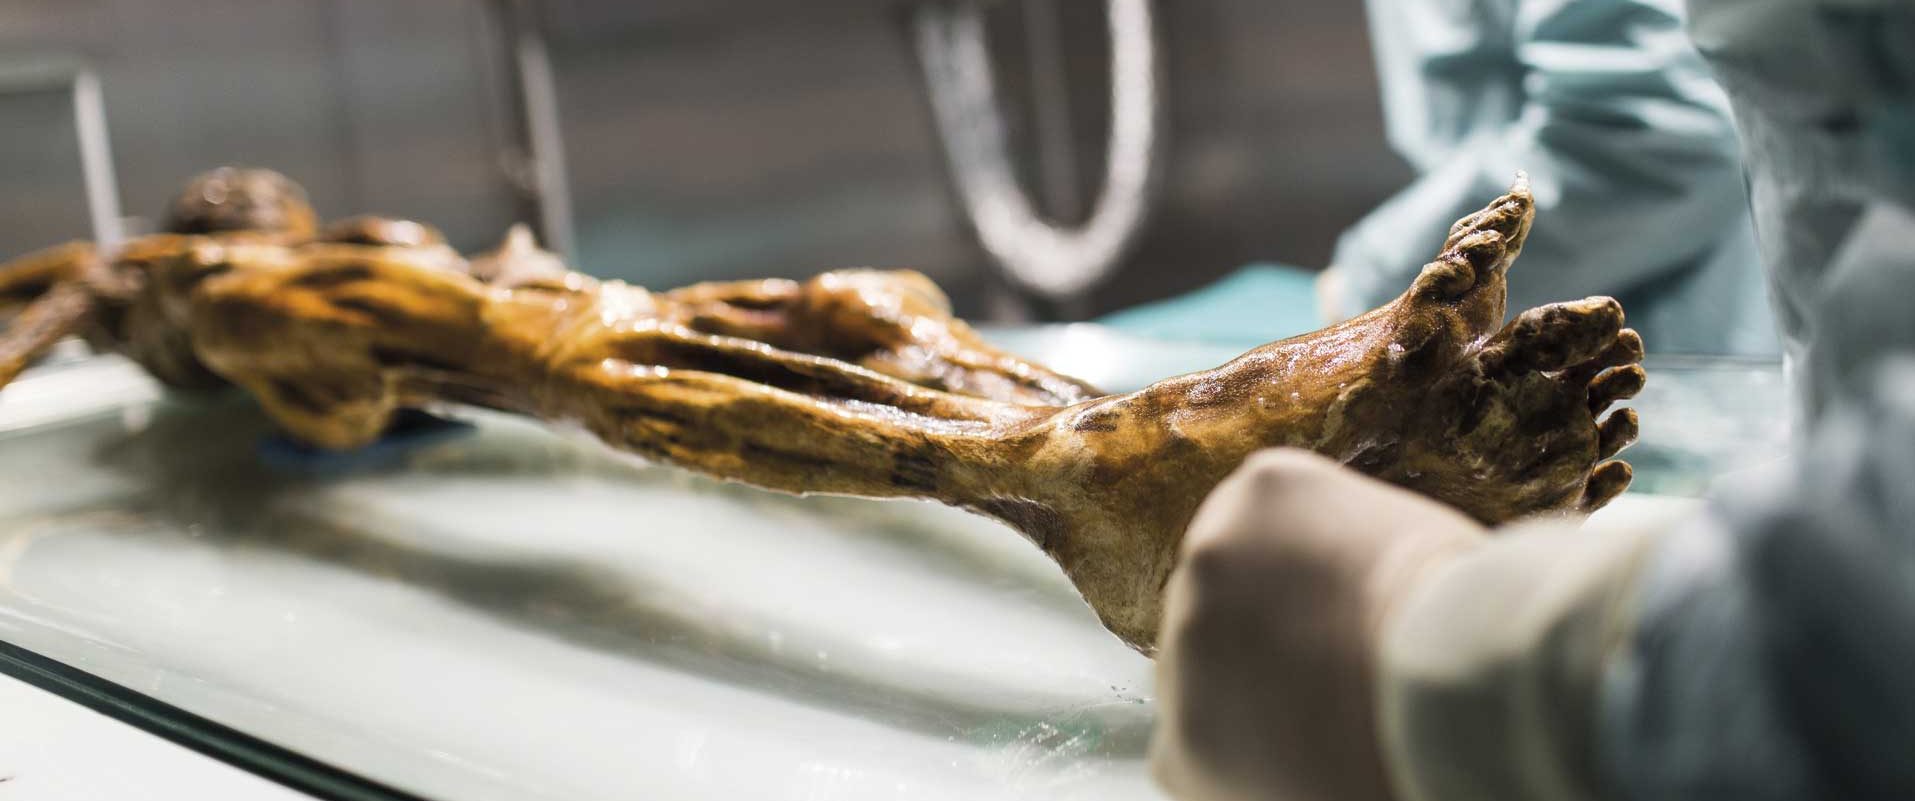 Ötzi - The mummy in the South Tyrol Museum of Archaeology